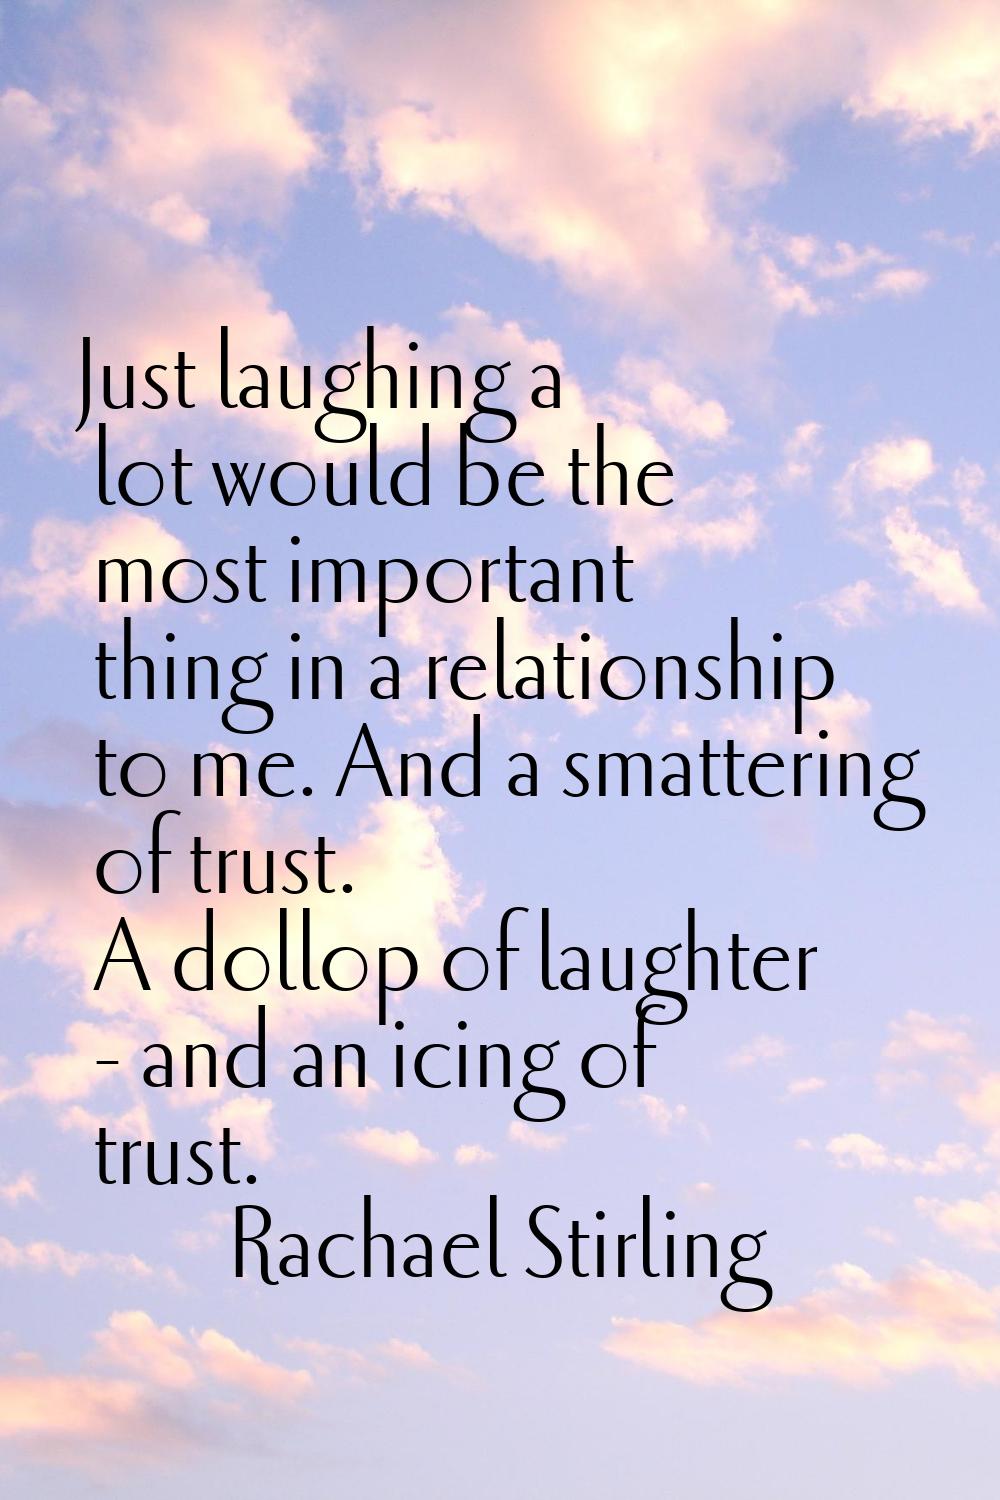 Just laughing a lot would be the most important thing in a relationship to me. And a smattering of 